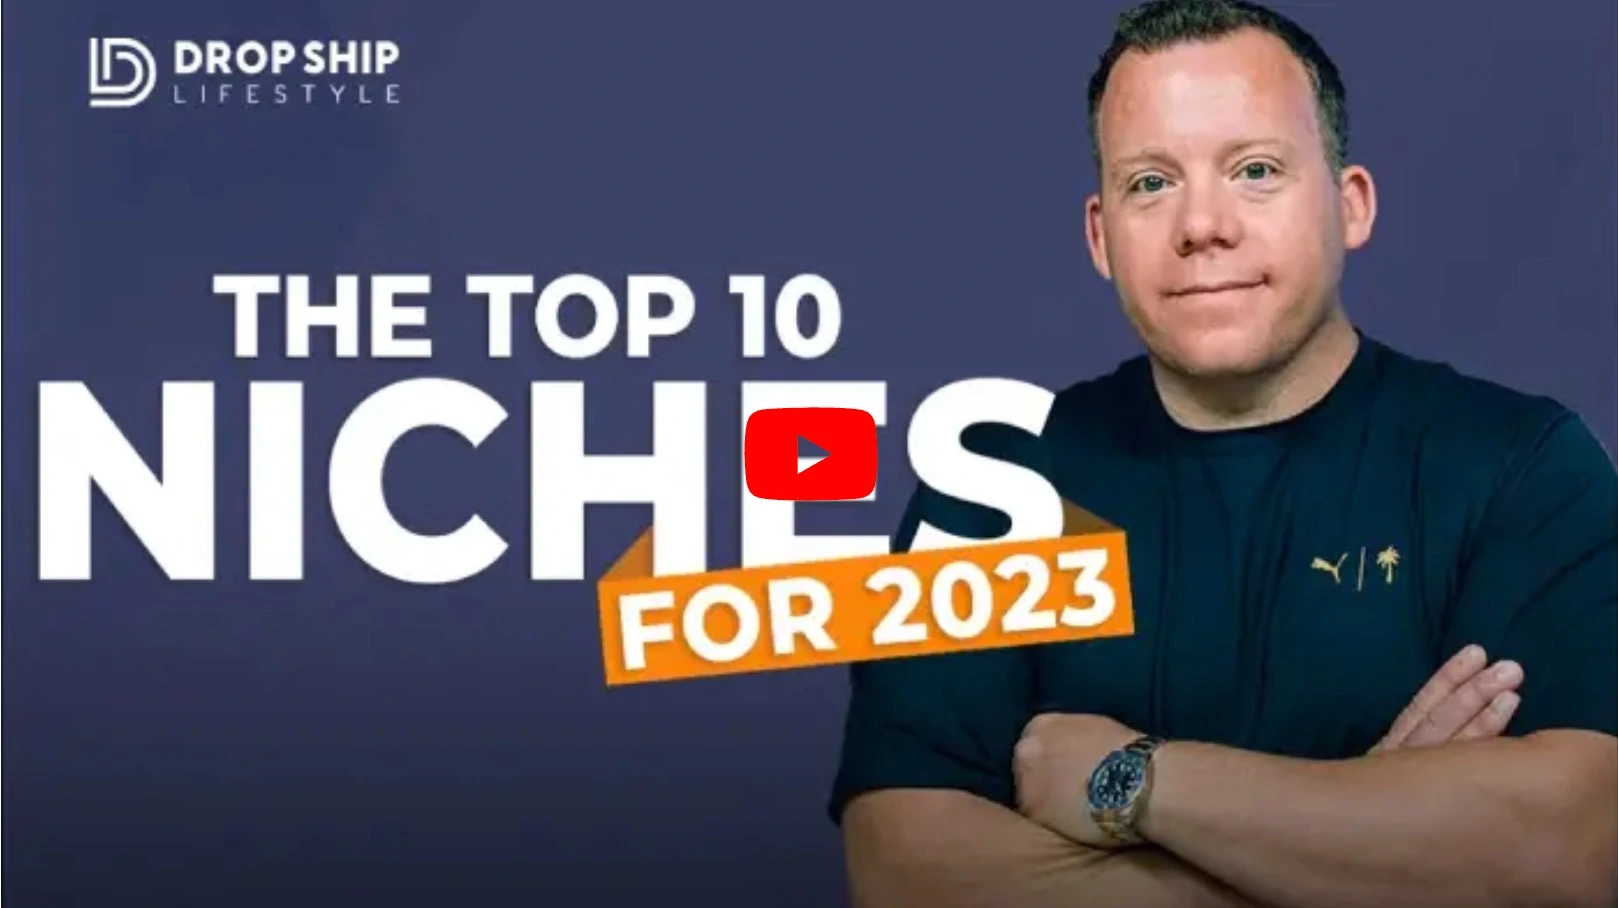 Top 10 Niches for 2023